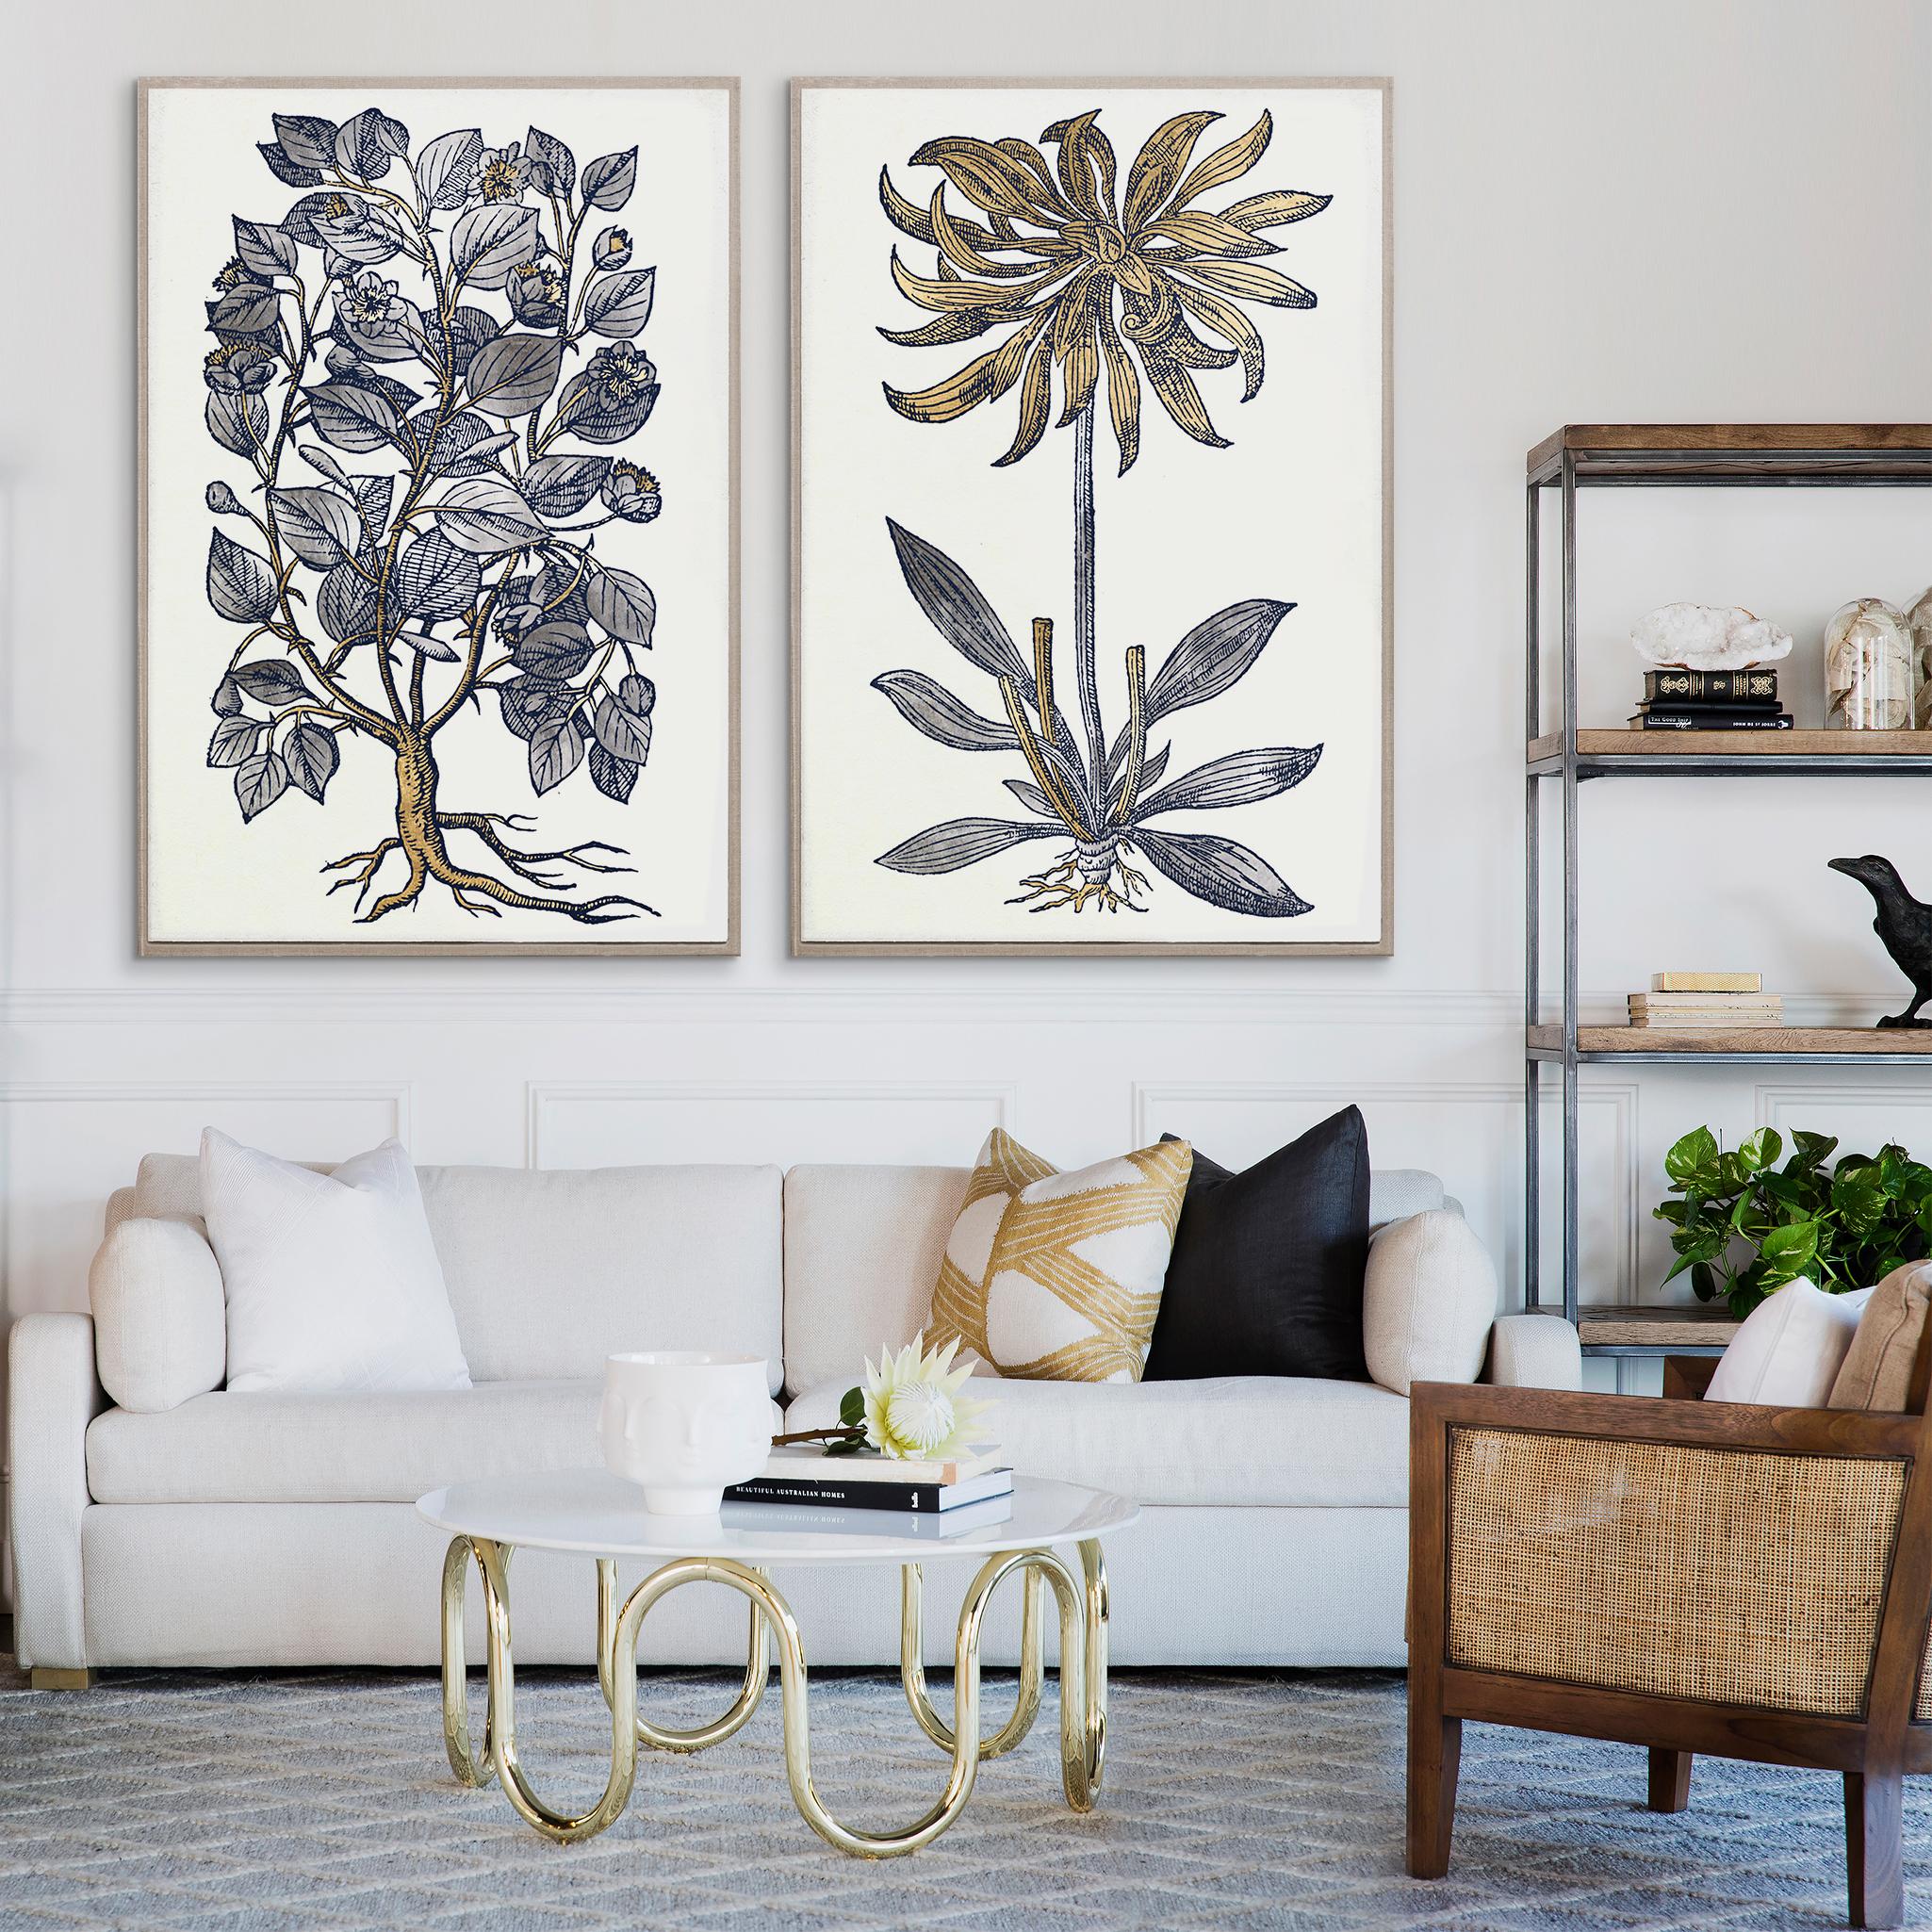 This image, inspired by 18th century botanical prints, is a deeply layered illustration with a dynamic, modern feel. Each image in this series is hand-leafed in gold and silver, then silkscreened with a dark blue ink. This unique process is the